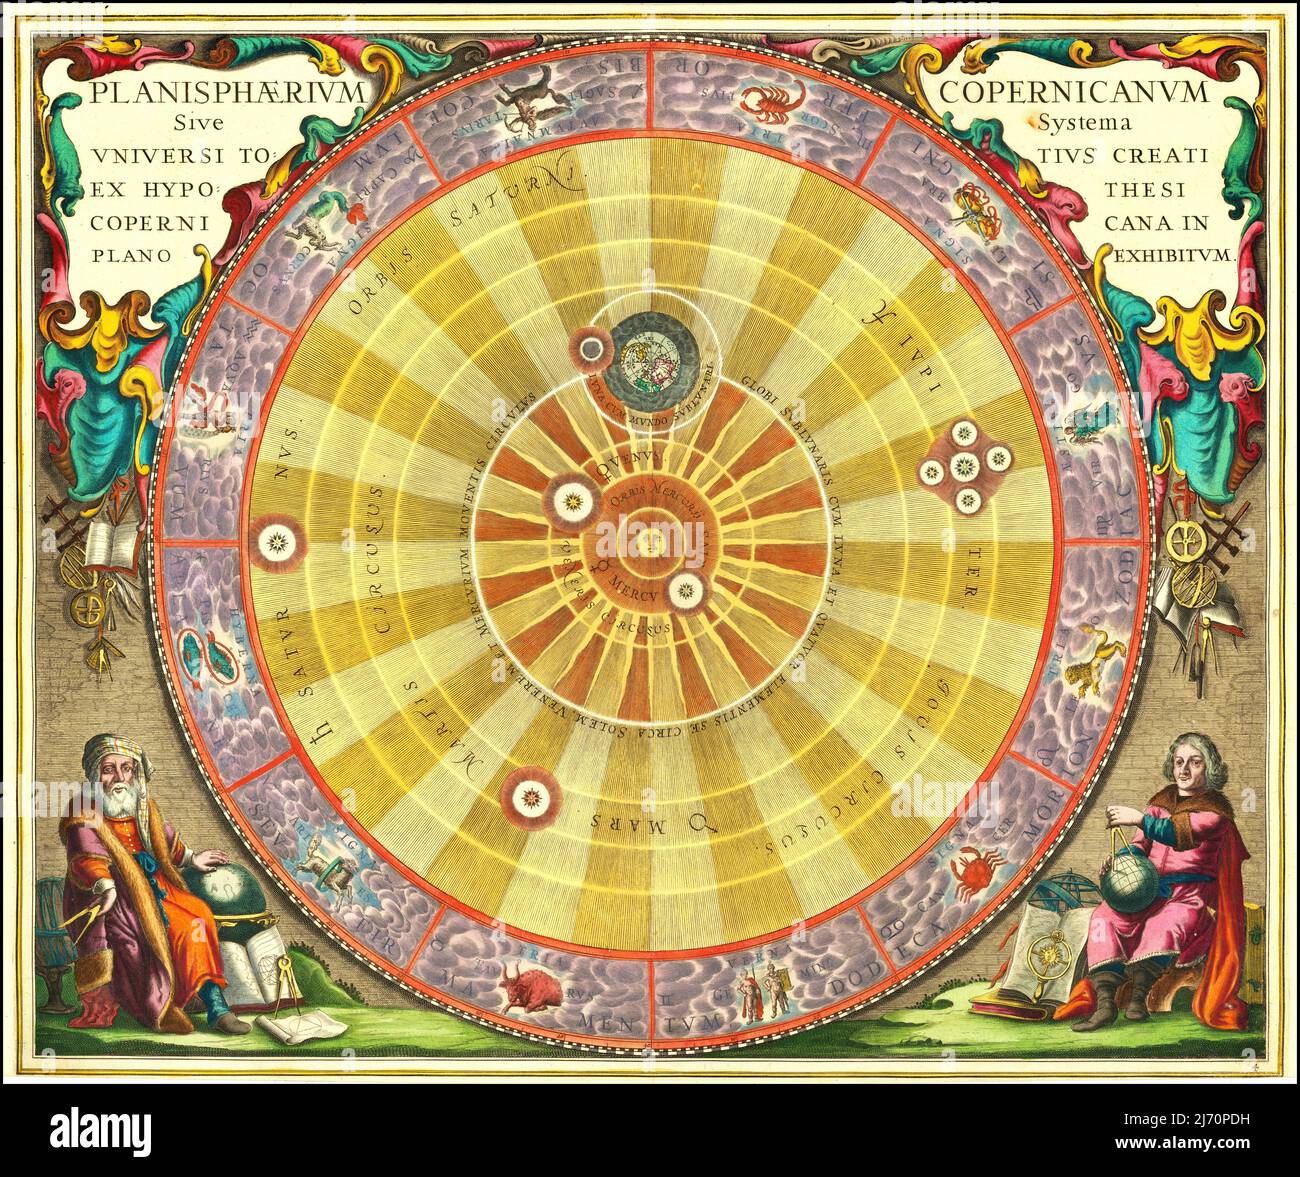 Andreas Cellarius - The Copernican Plane: Or, the System of the Entire Universe Created from the Copernican Hypothesis in Plan Stock Photo